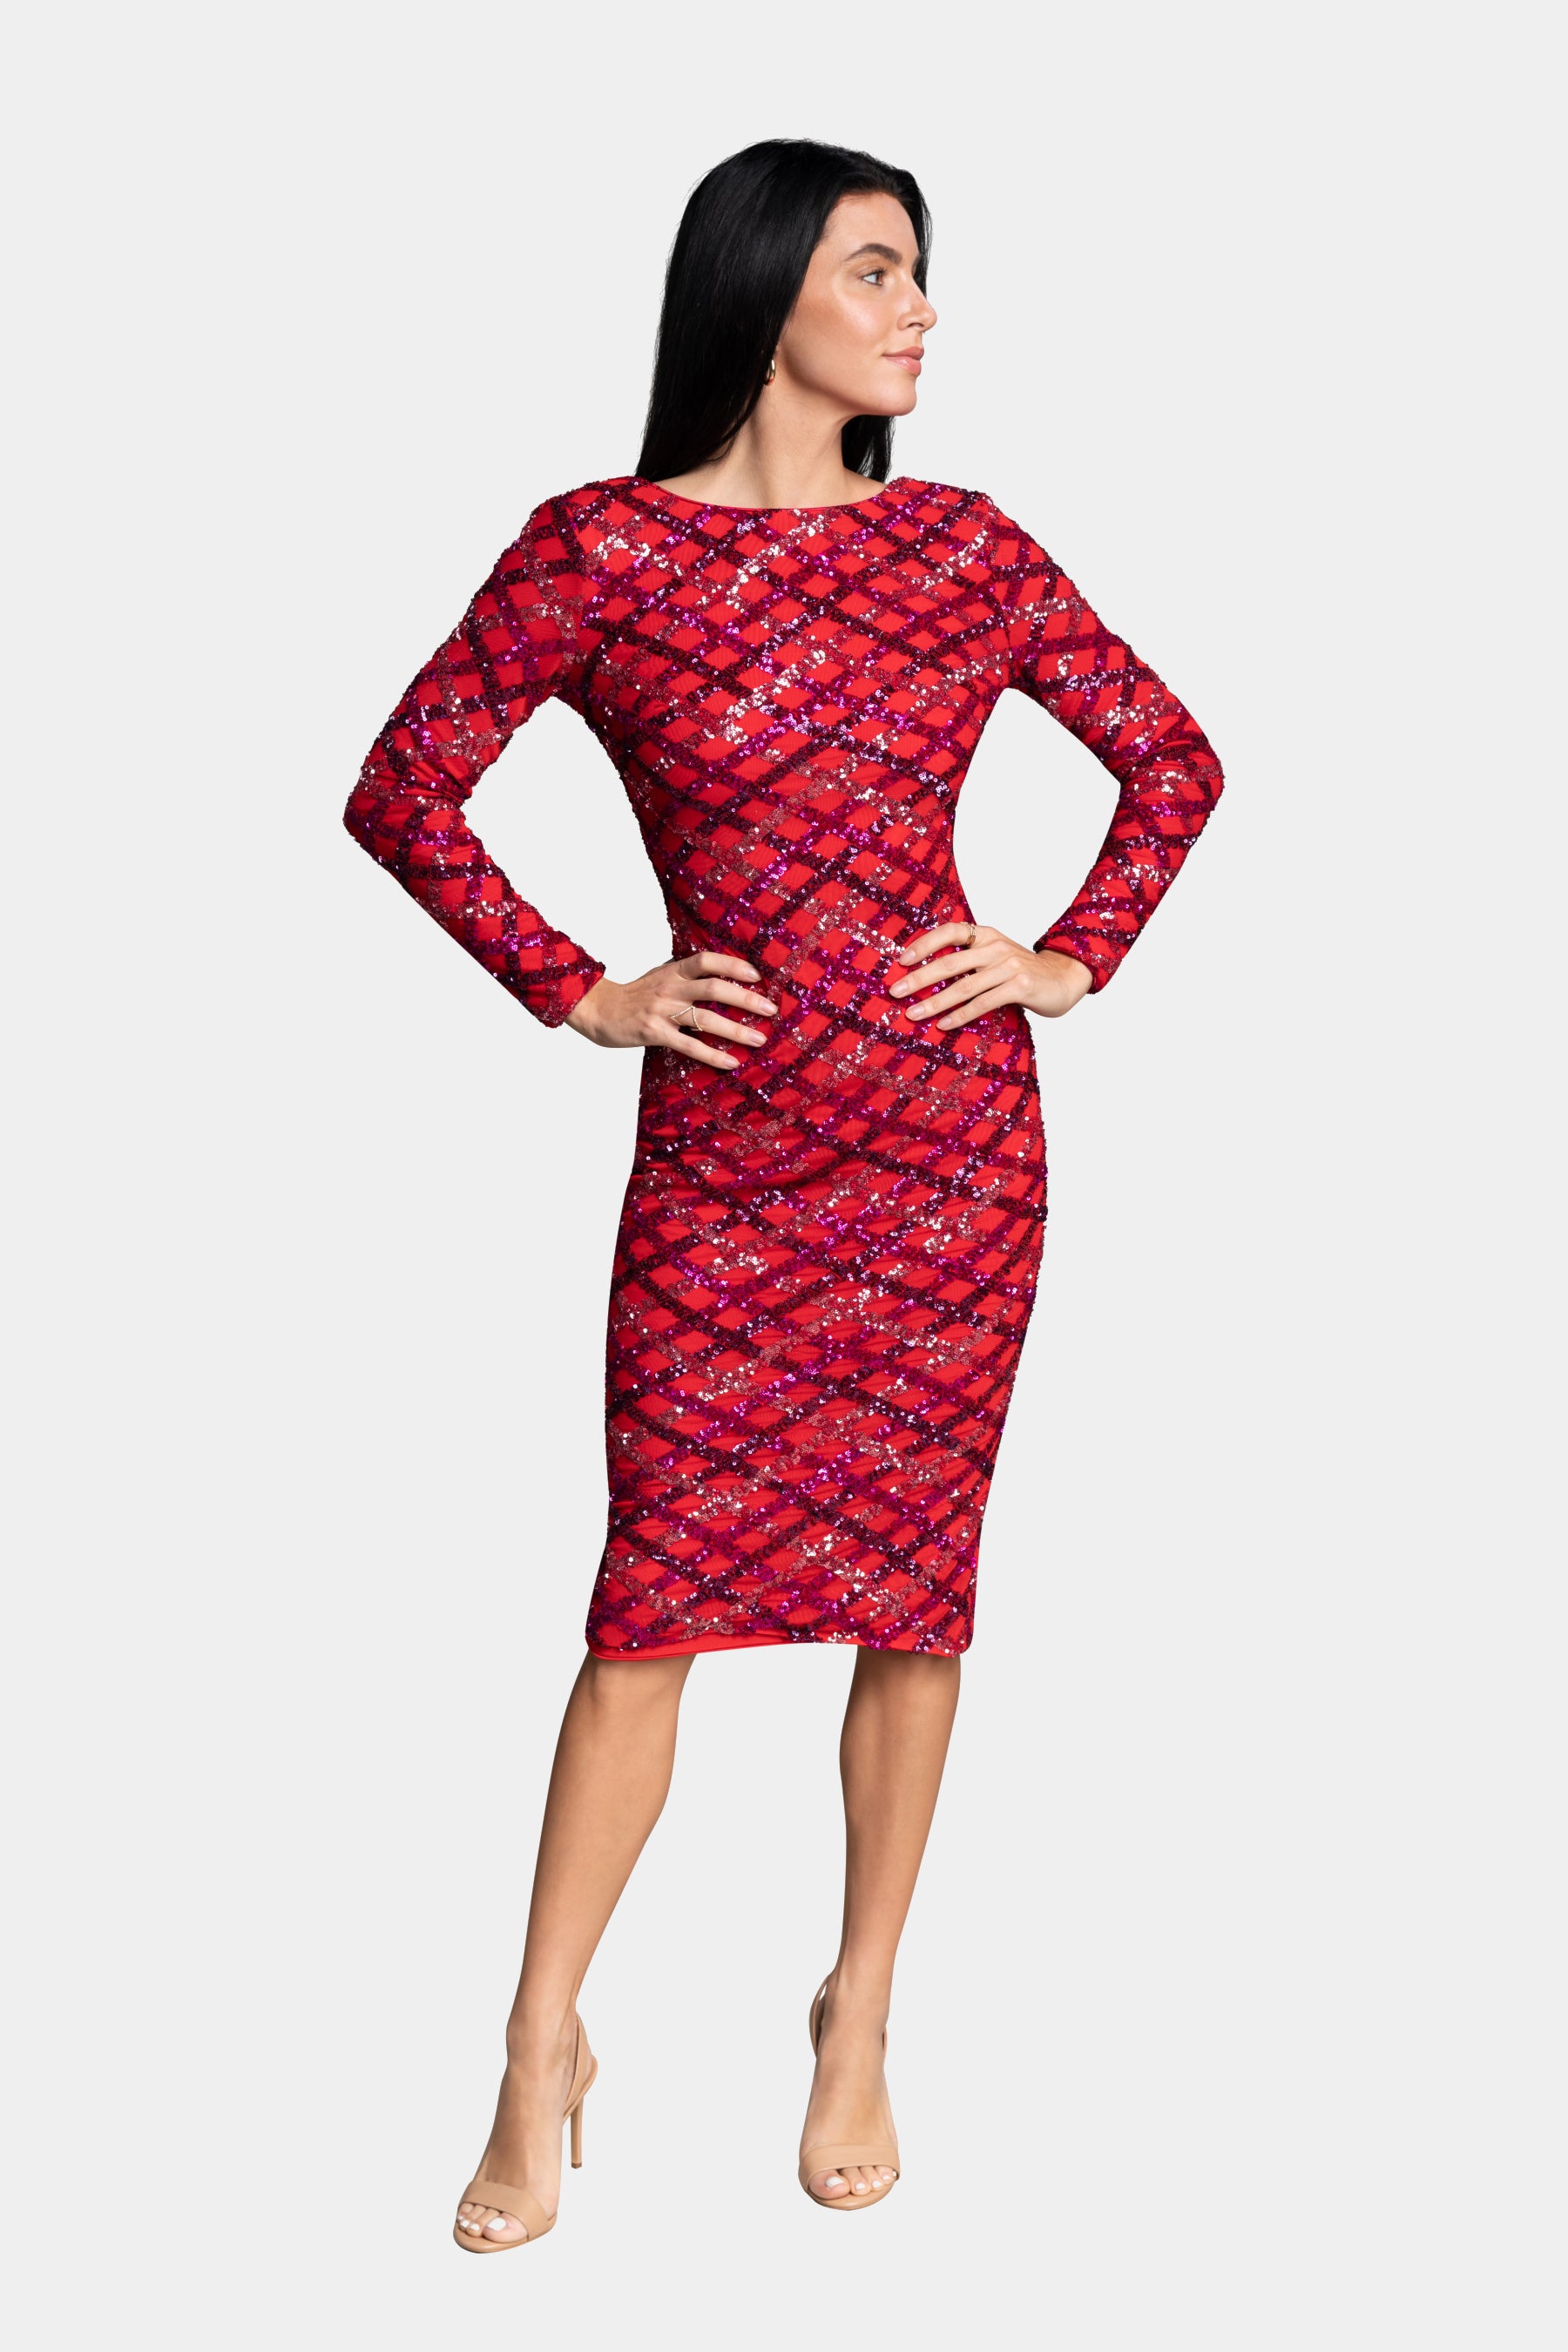 Emery Long Sleeve Bodycon in Red Mesh